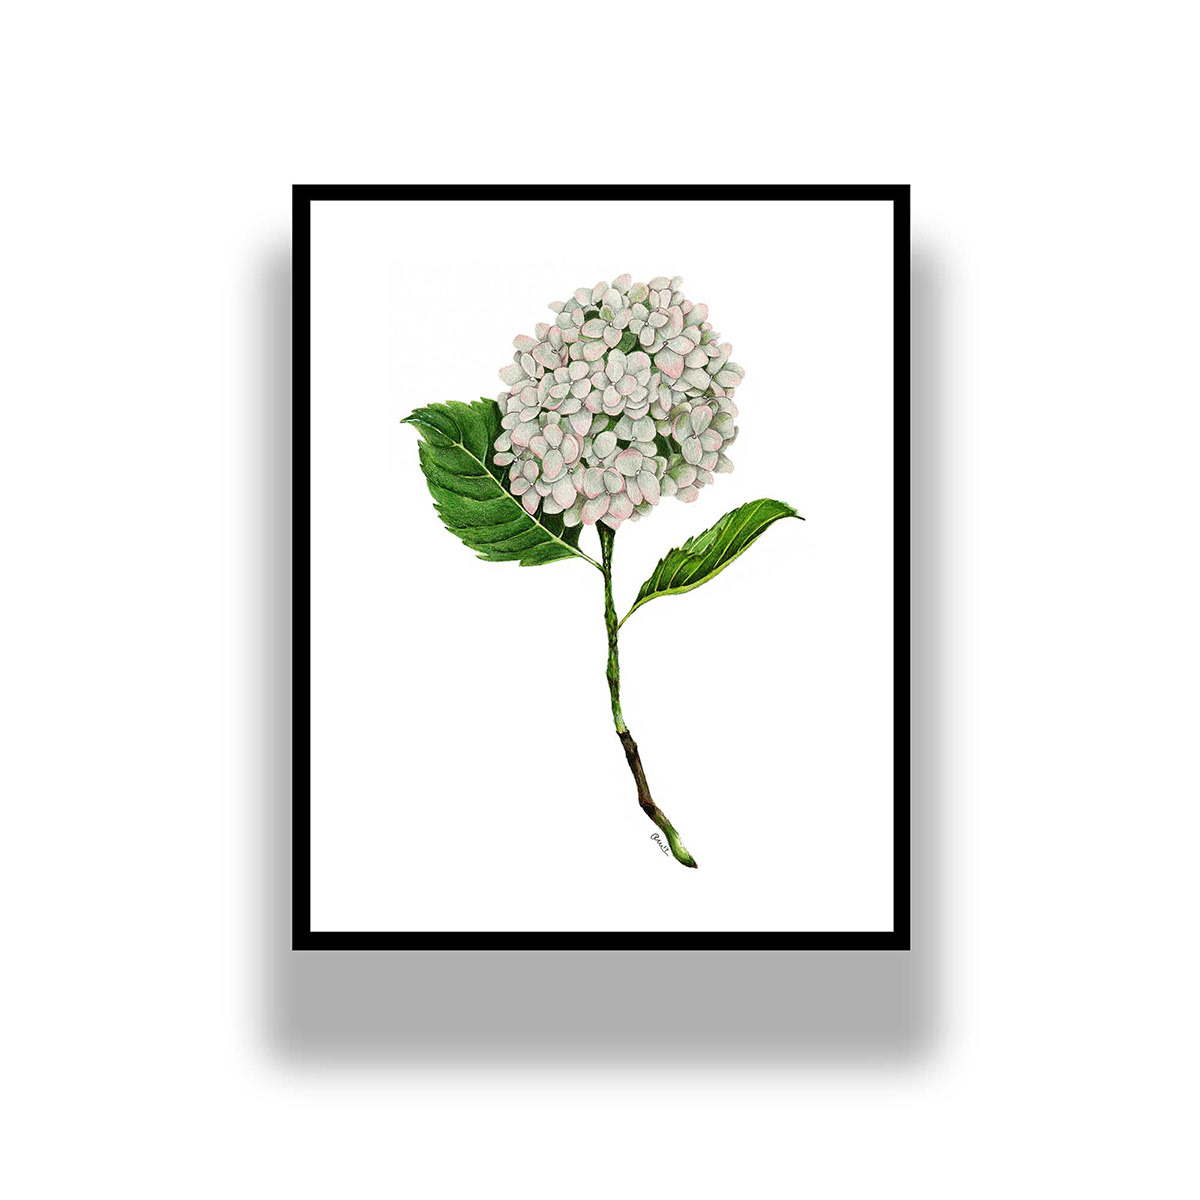 Vintage inspired botanical colored pencil illustration of a hydrangea bloom.  One of 13 in series